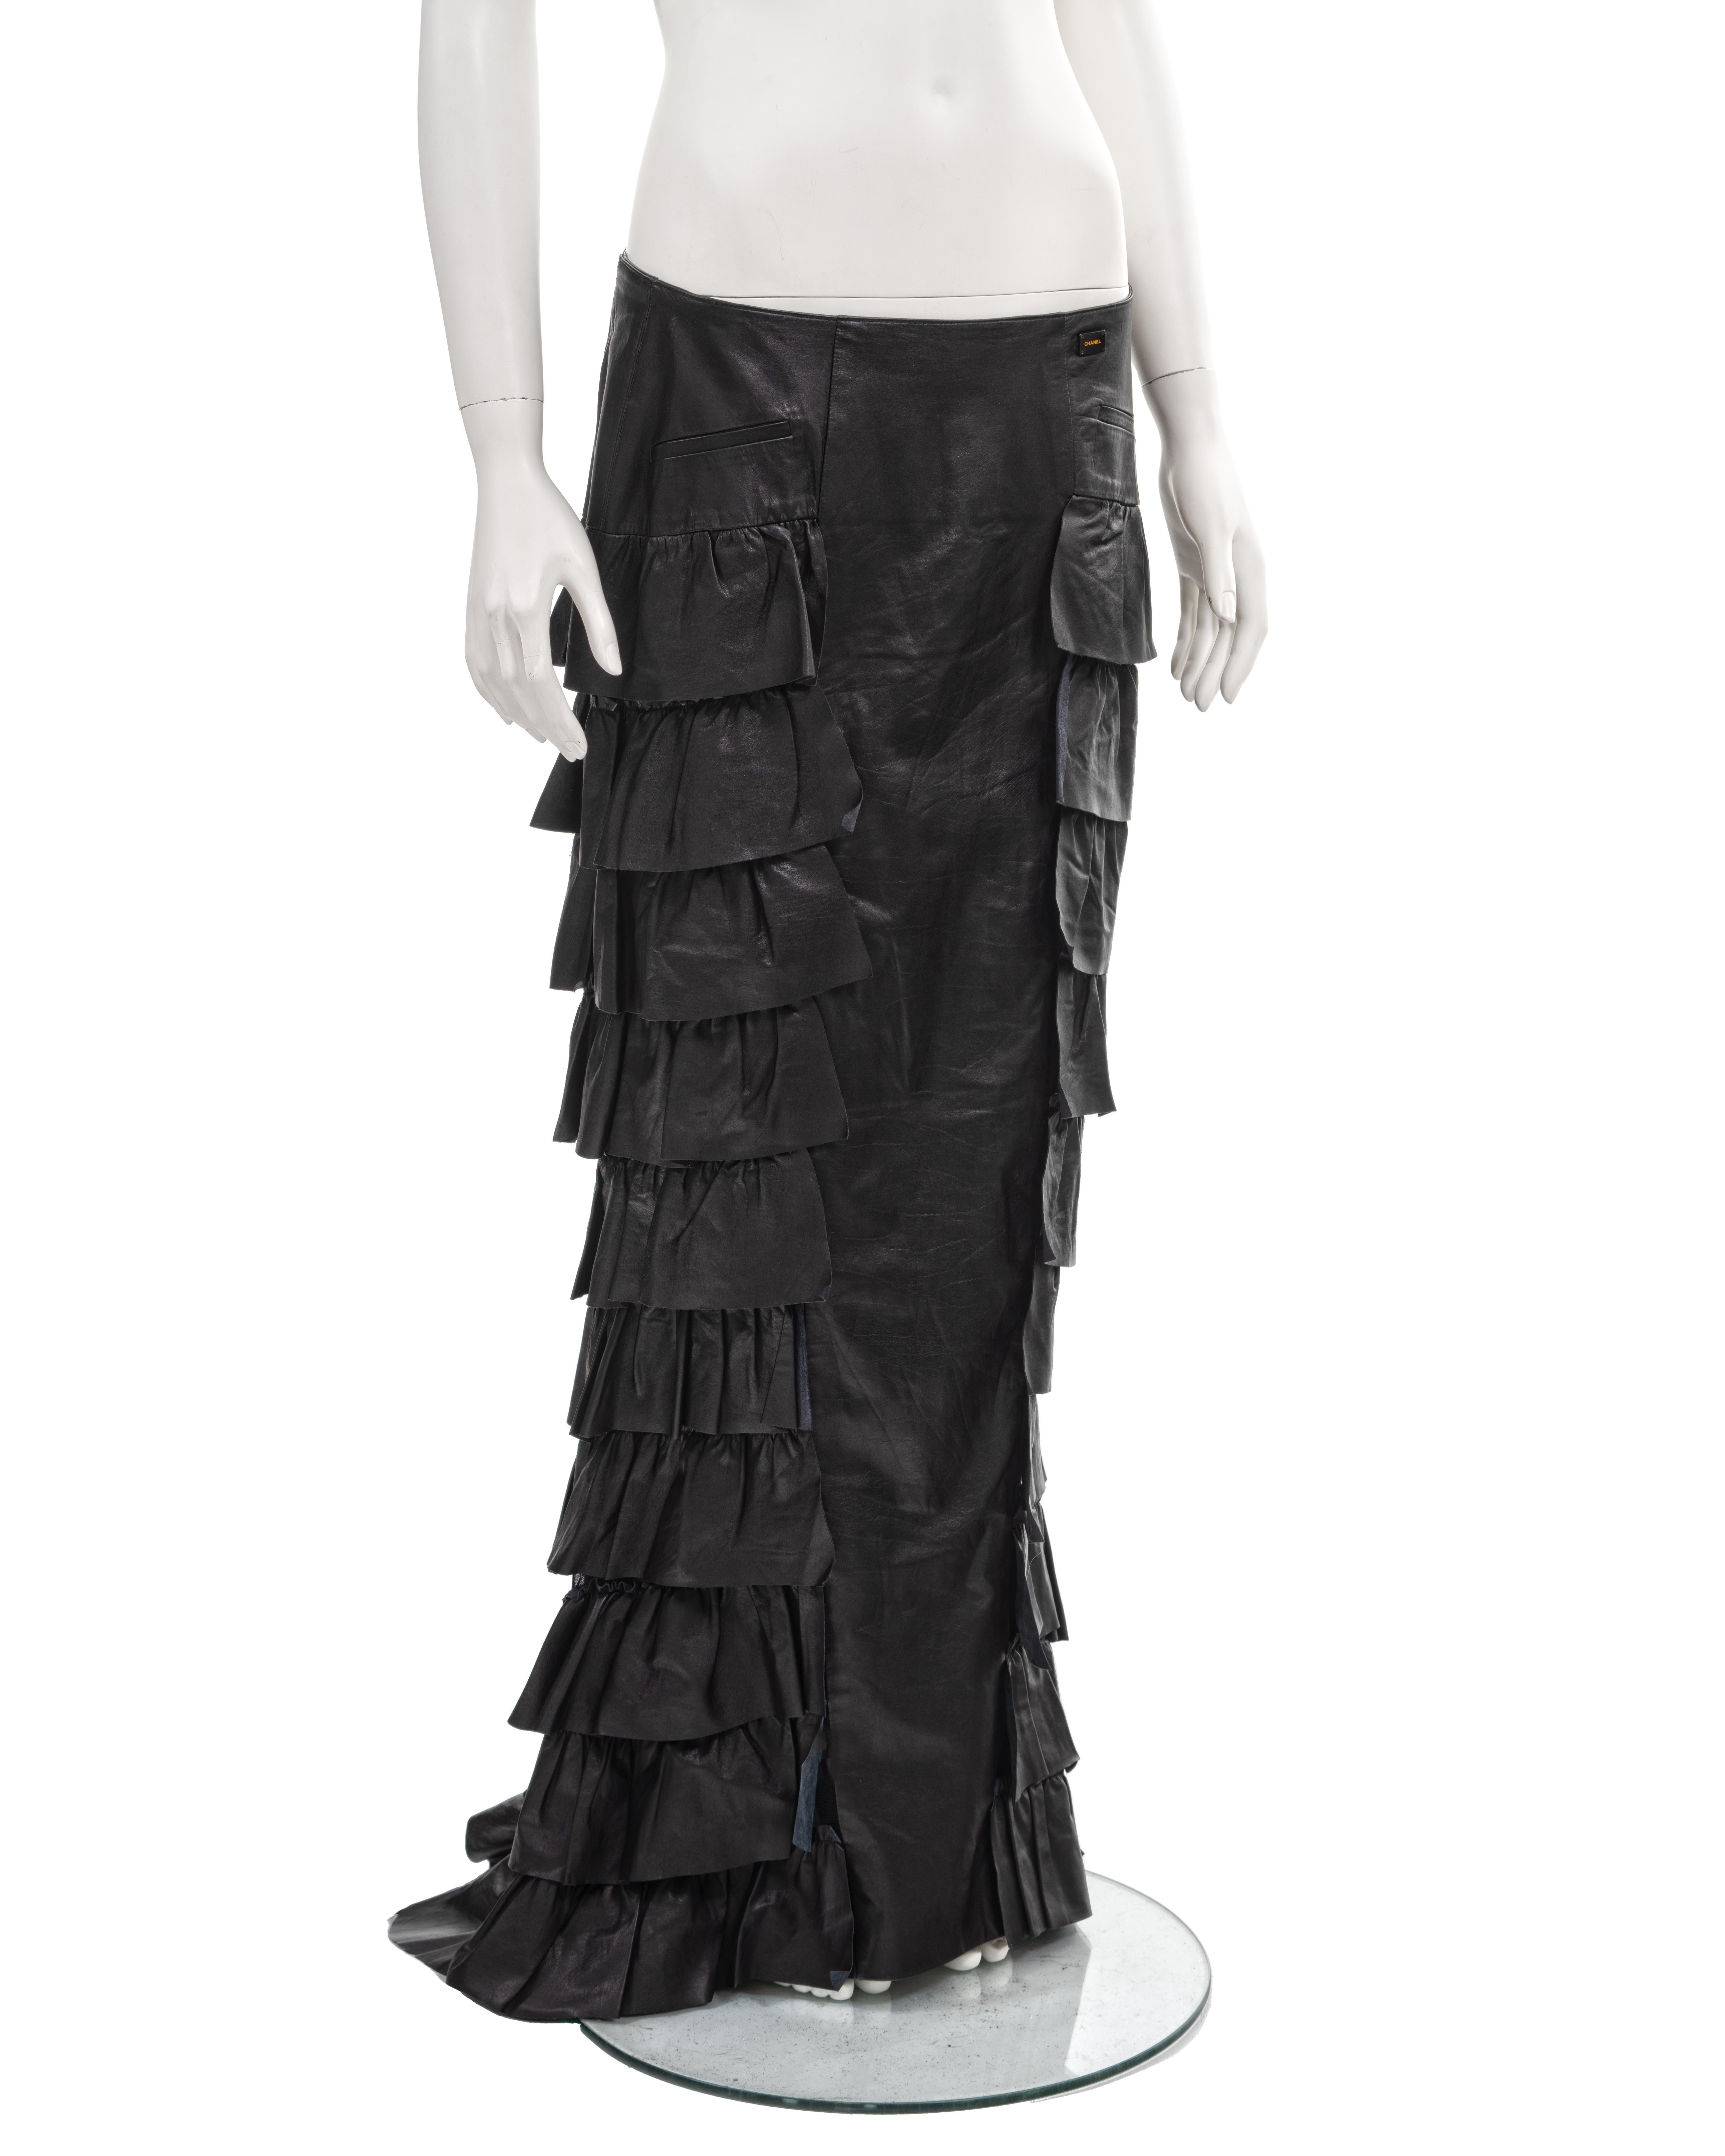 Chanel by Karl Lagerfeld black leather tiered ruffled maxi skirt, fw 2001 1